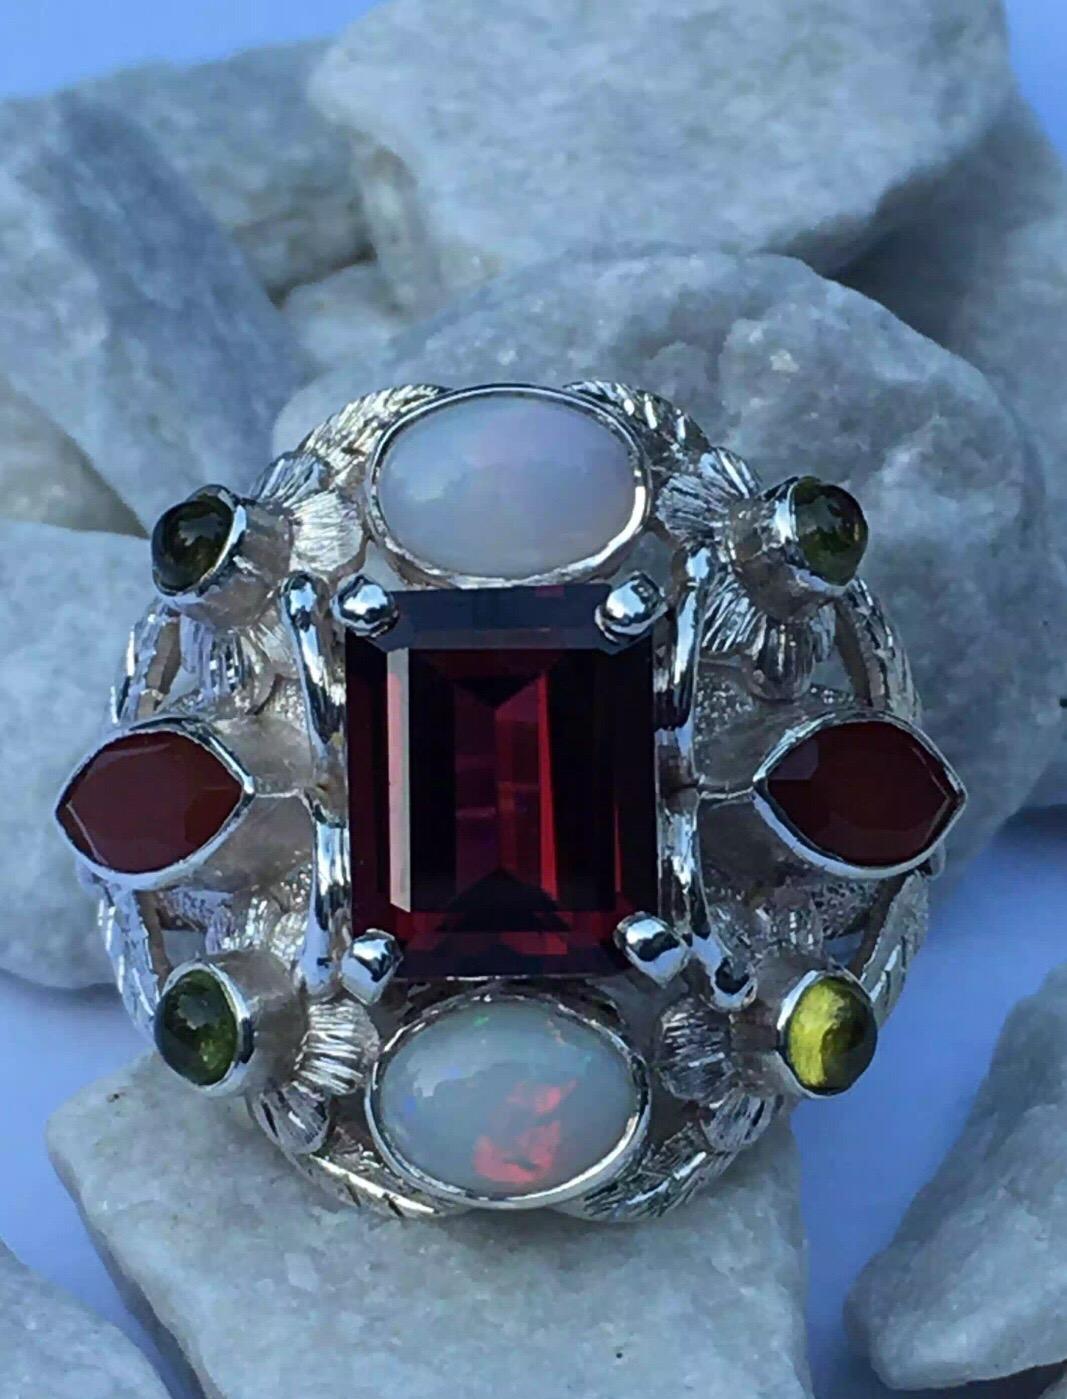 Garnet, Opal, Carnelian and Peridot Cocktail Ring This item is on sale for Black 4